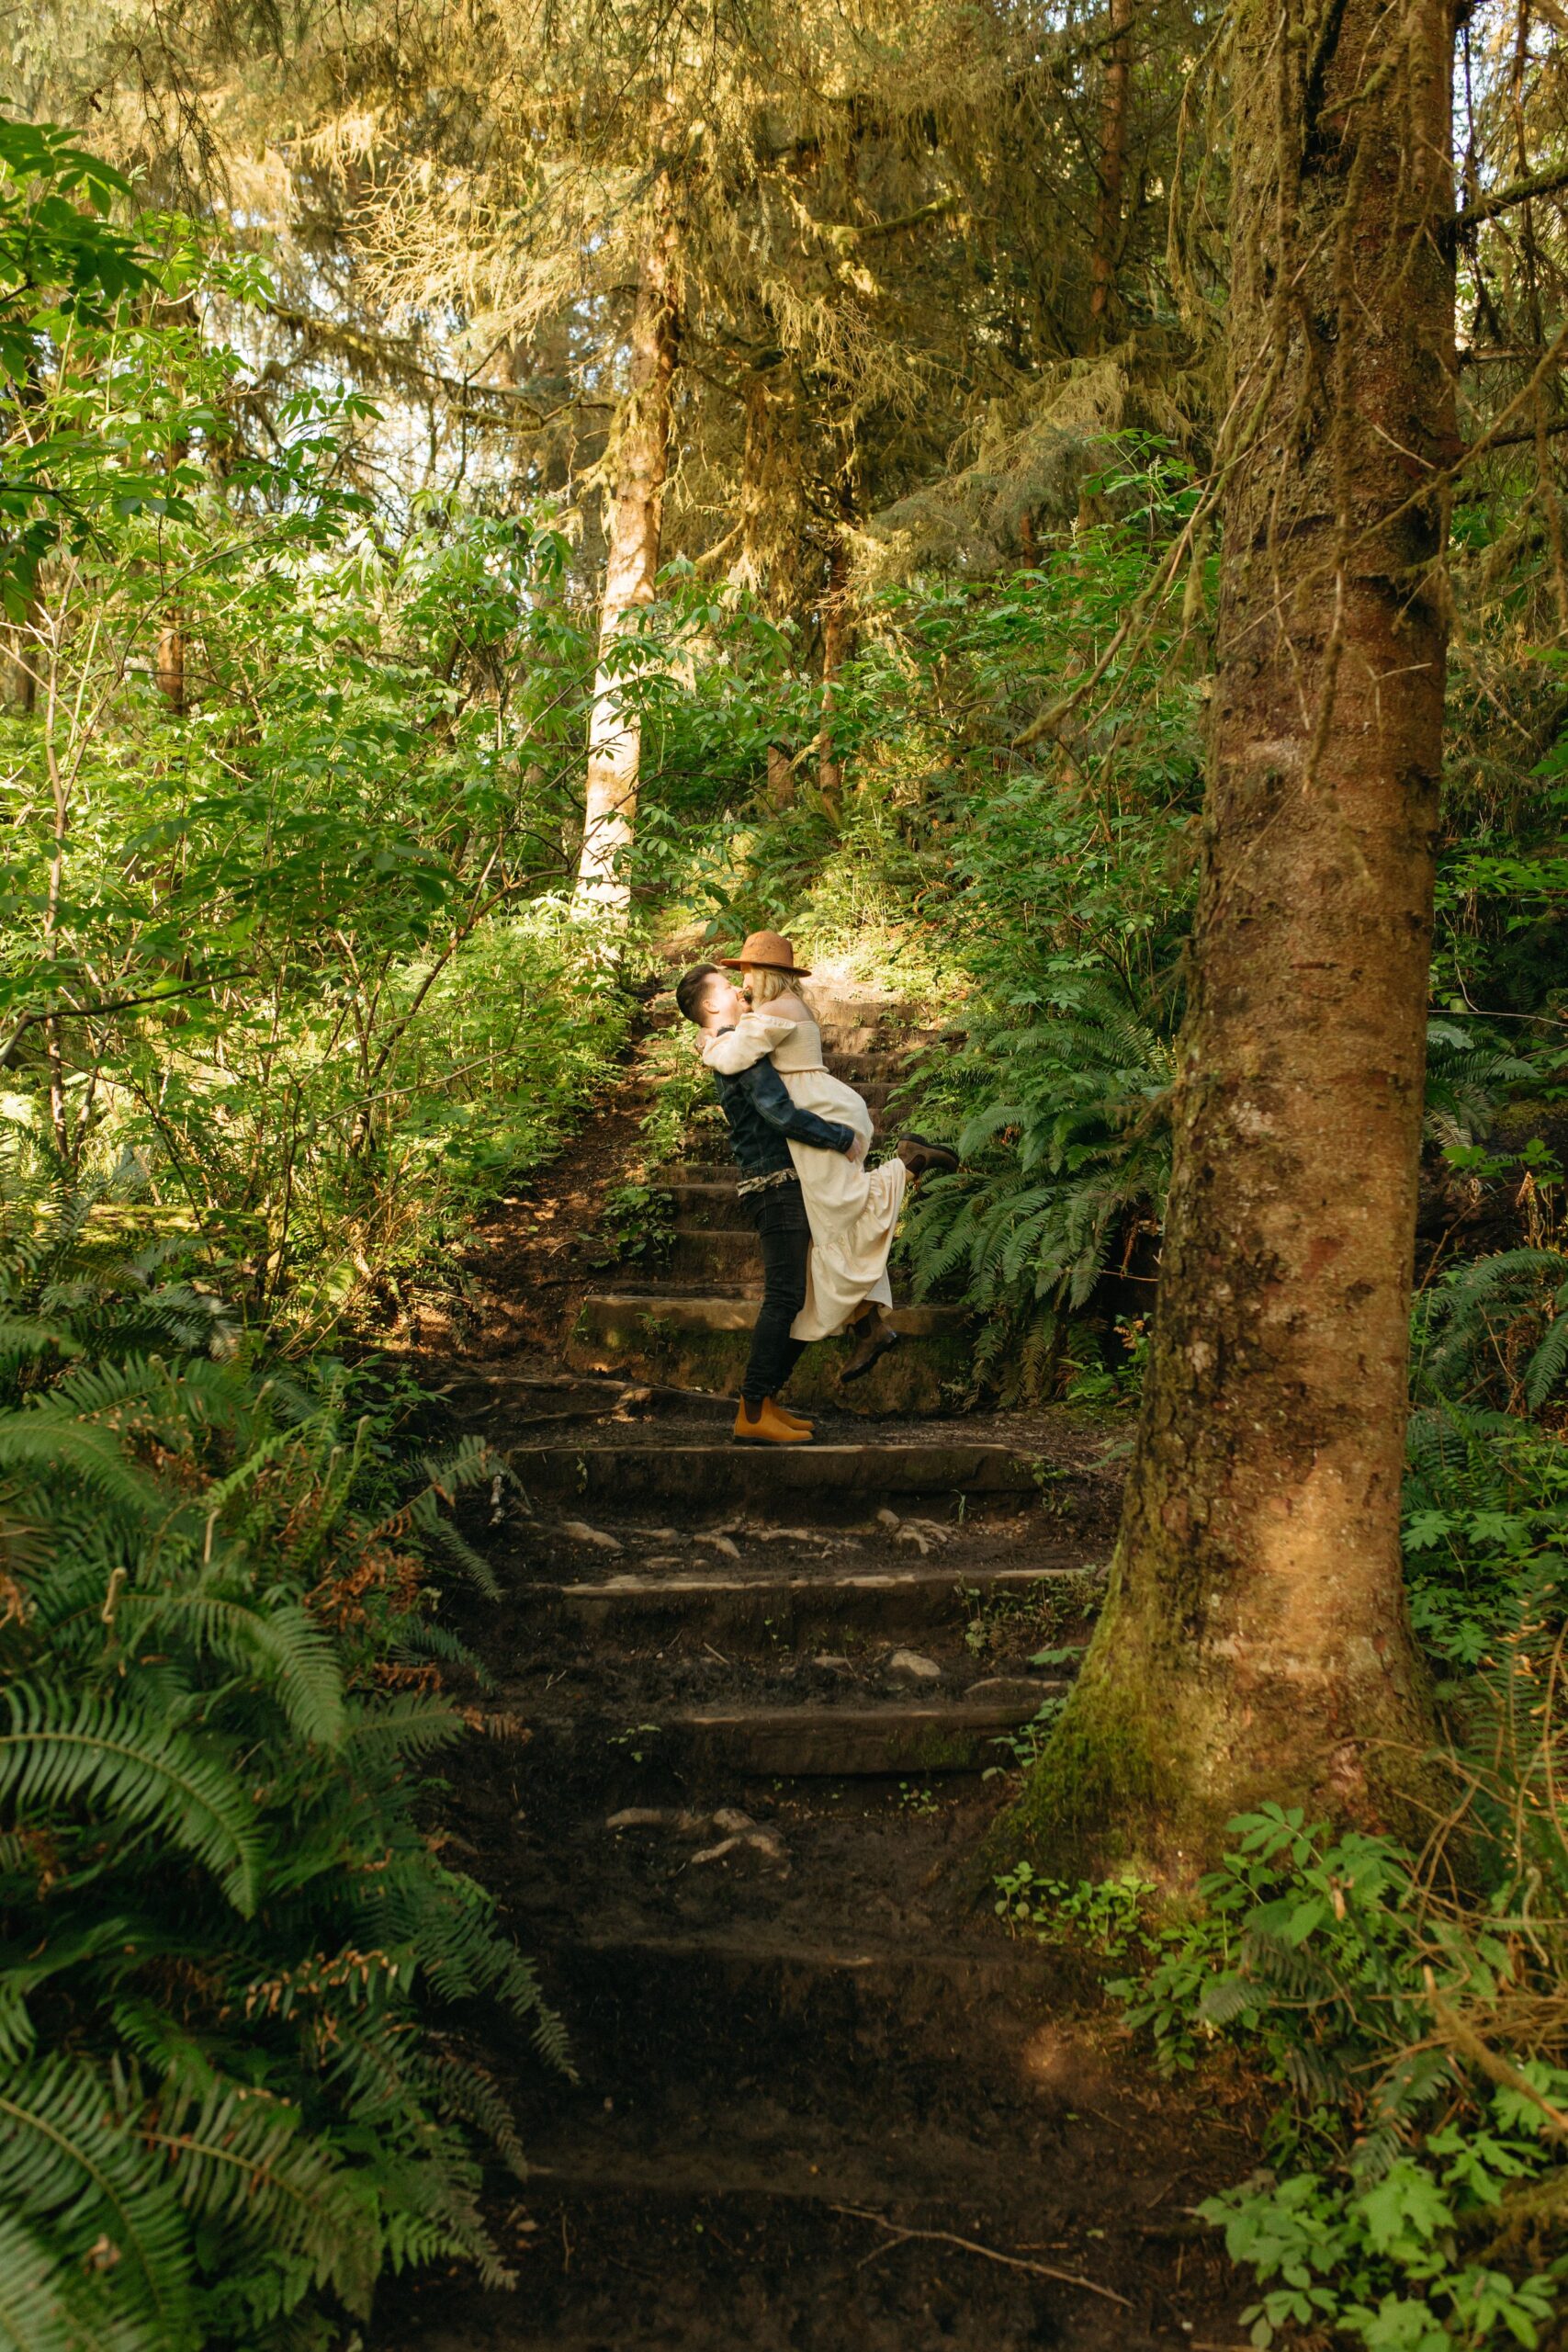 Man lifting woman on stairs in the middle of the forest near Oregon beach